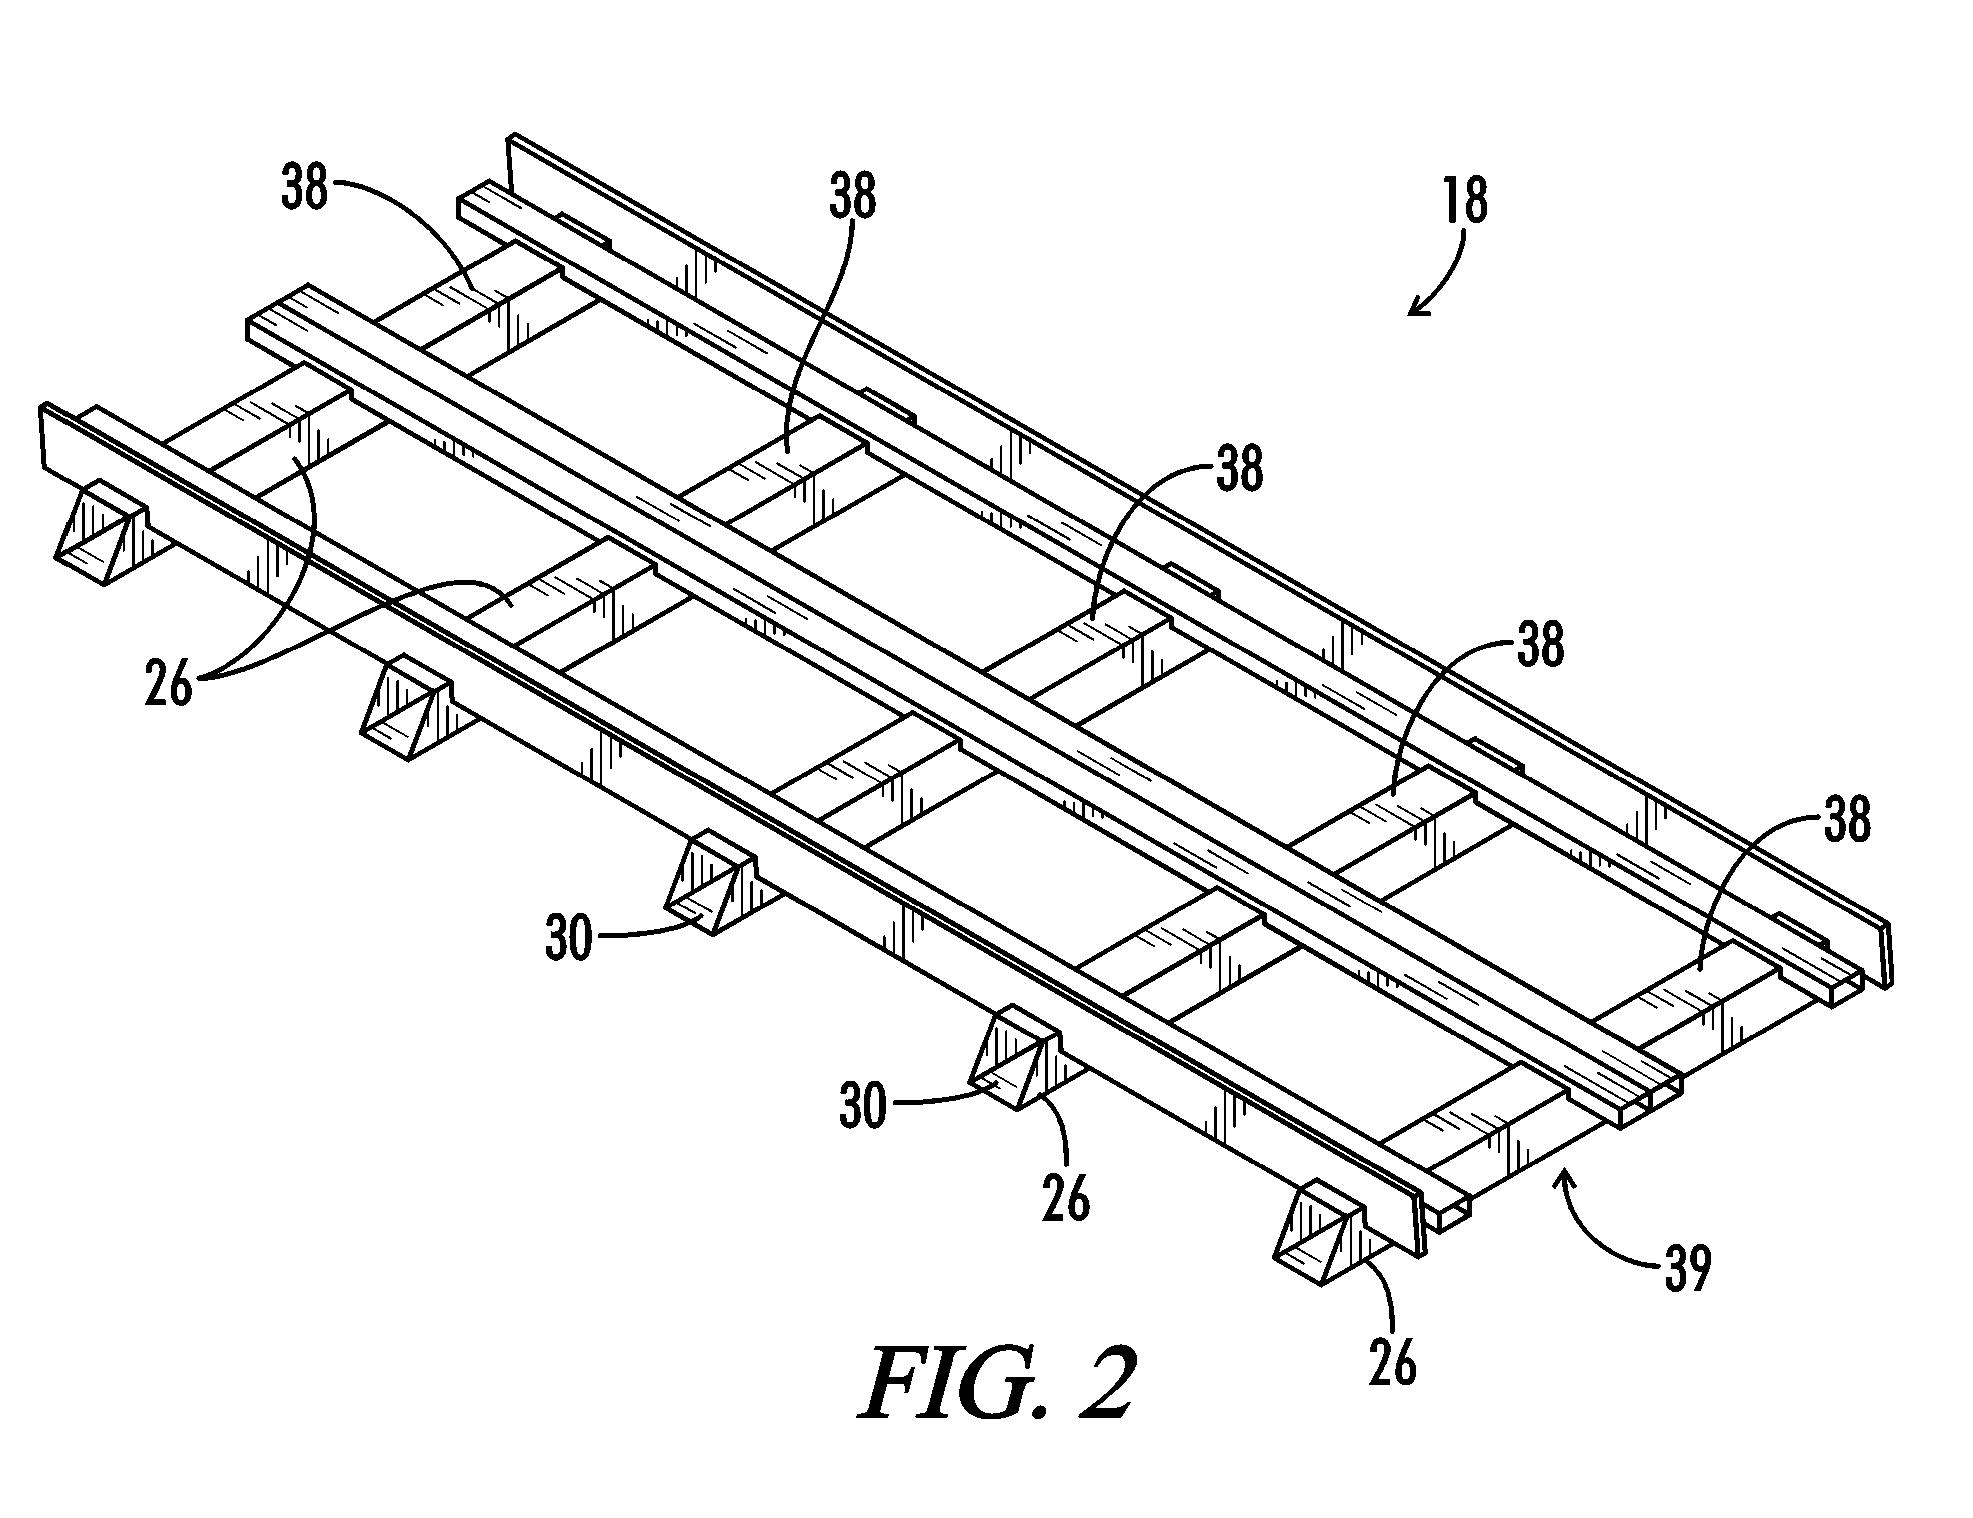 Composite support system for a fill media cooling tower